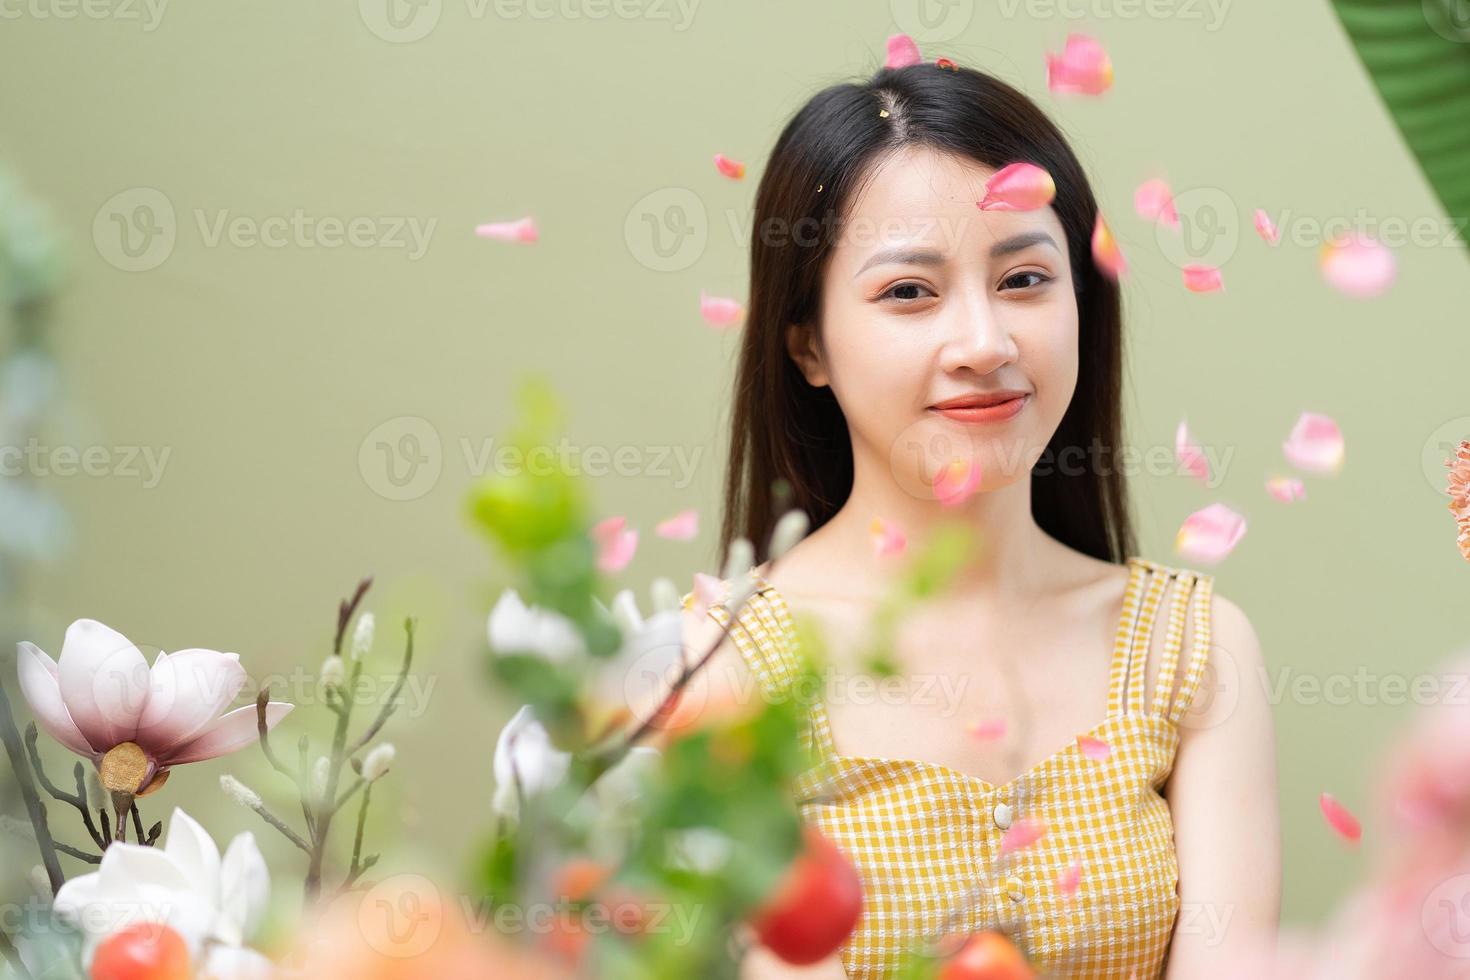 Beauty image of young Asian woman, summer concept photo